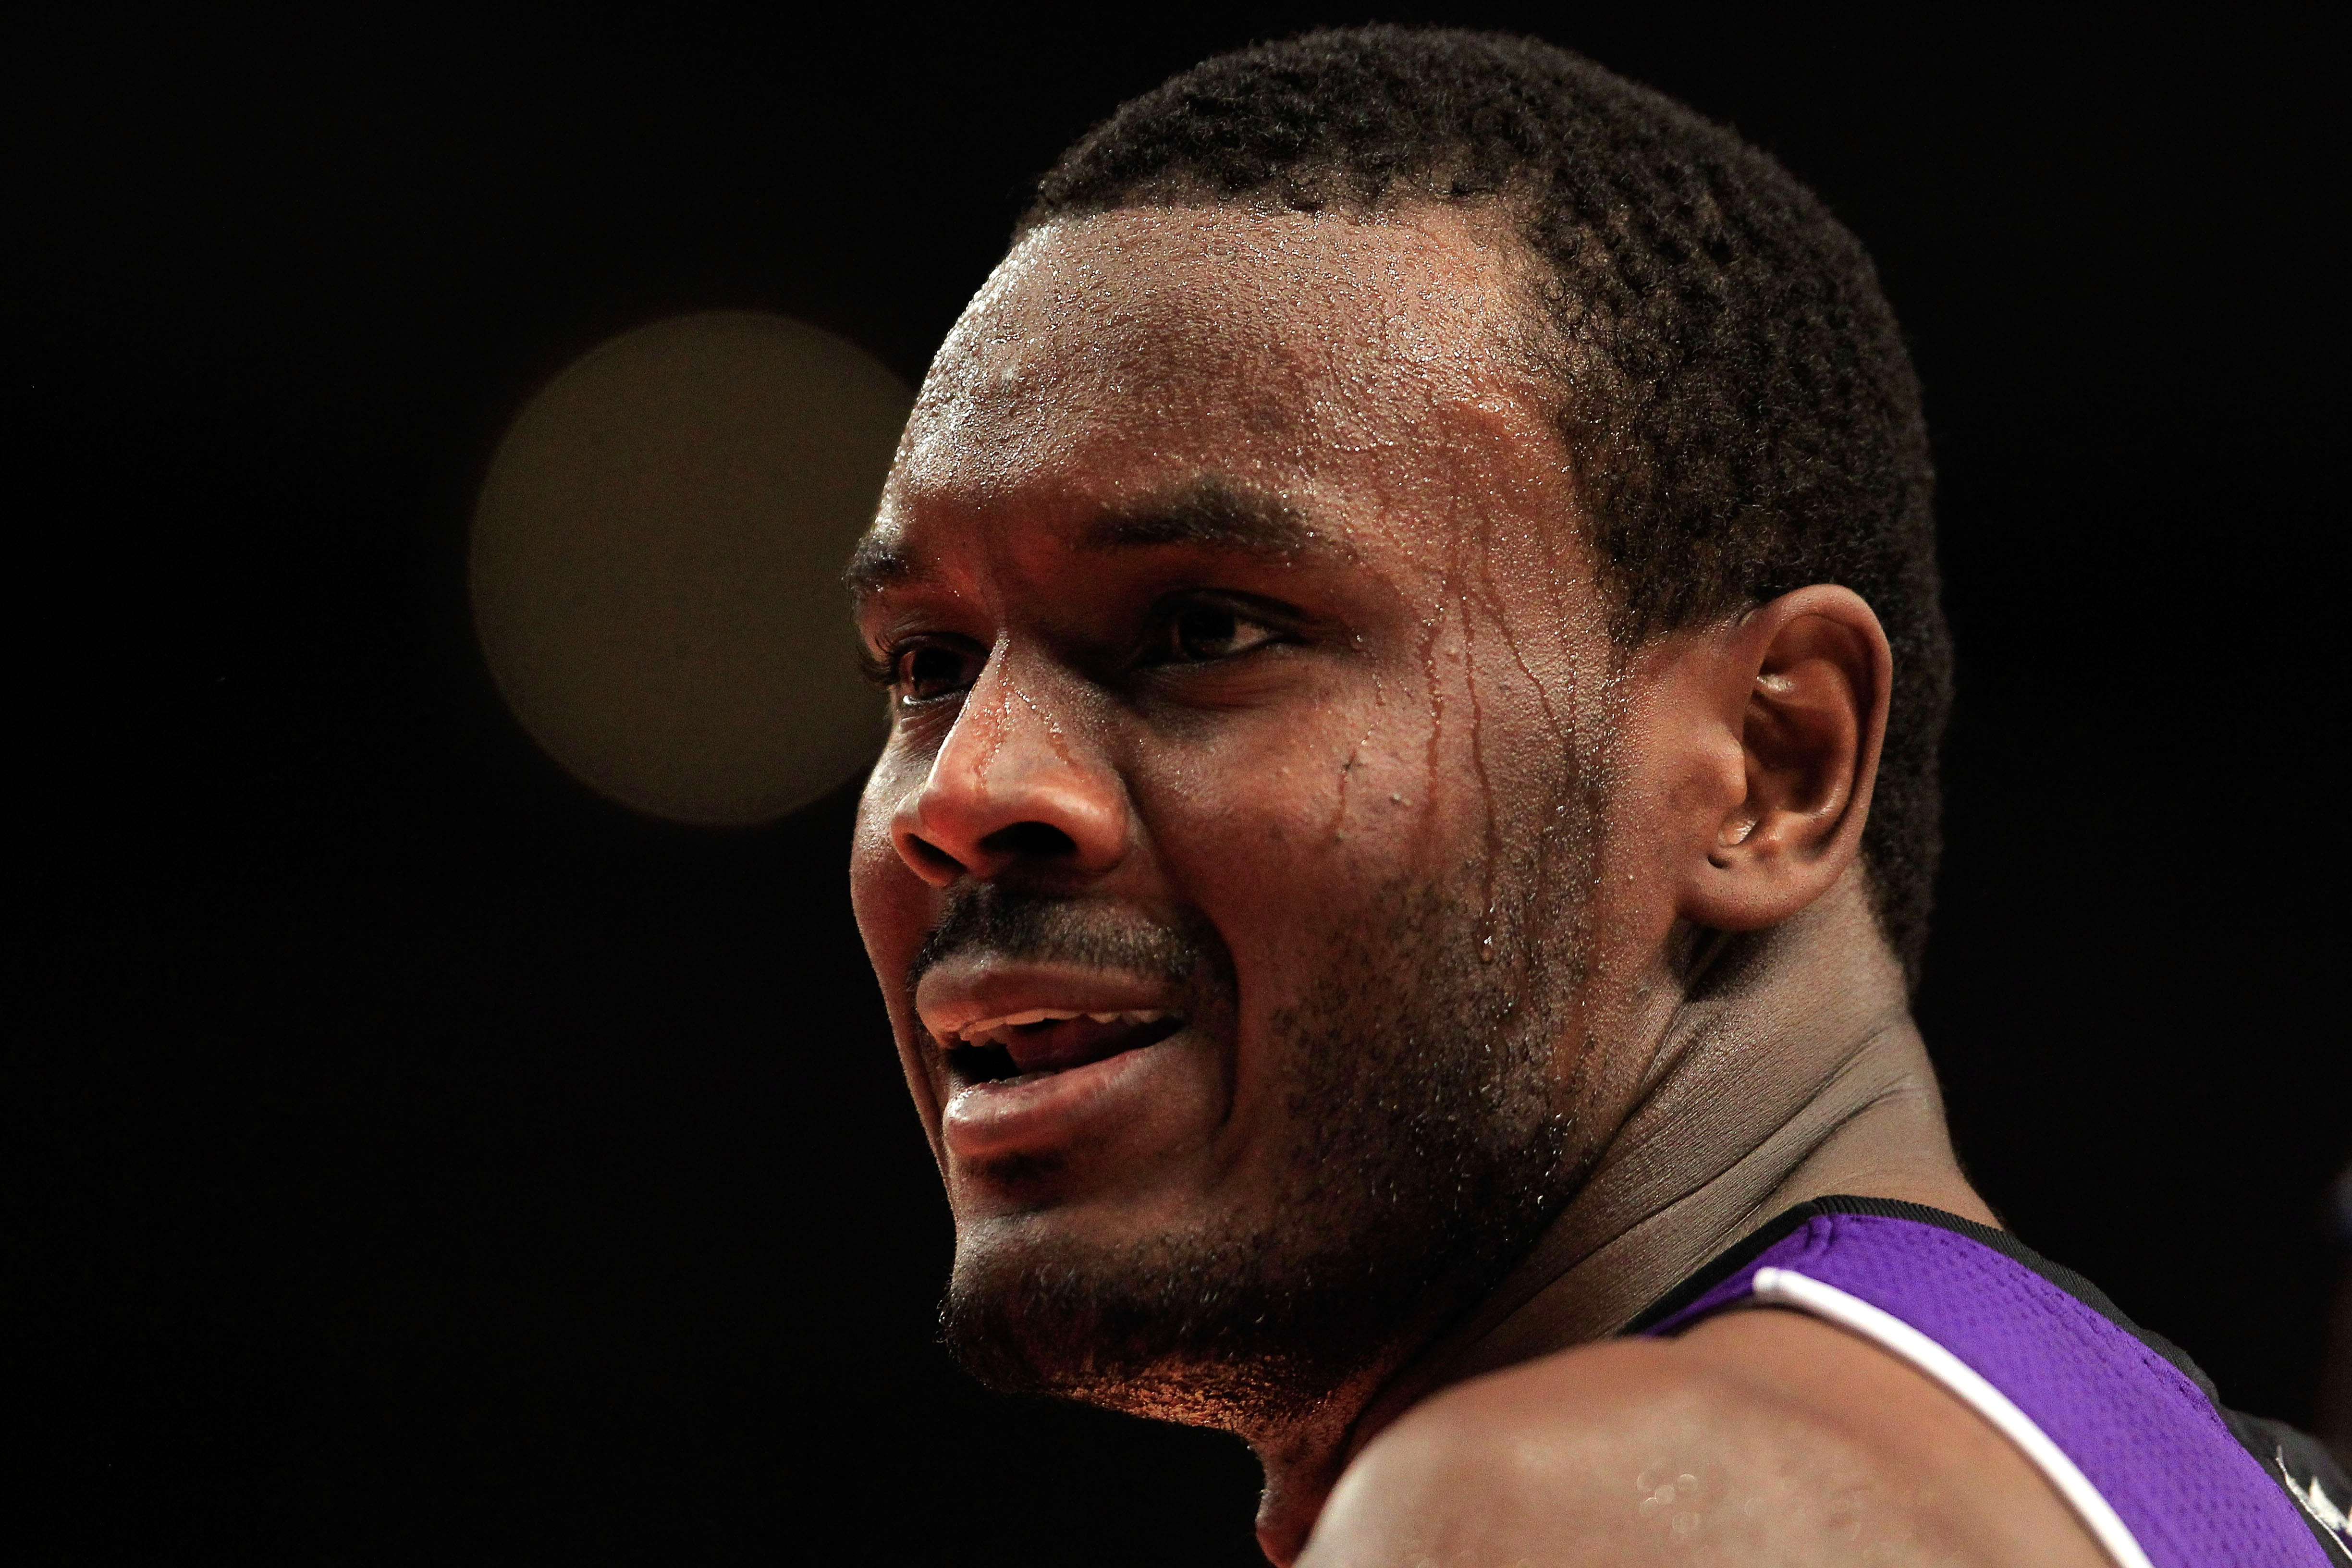 NEW YORK, NY - JANUARY 14:  Samuel Dalembert #10 of the Sacramento Kings looks on during the game against the New York Knicks at Madison Square Garden on January 14, 2011 in New York City. NOTE TO USER: User expressly acknowledges and agrees that, by down